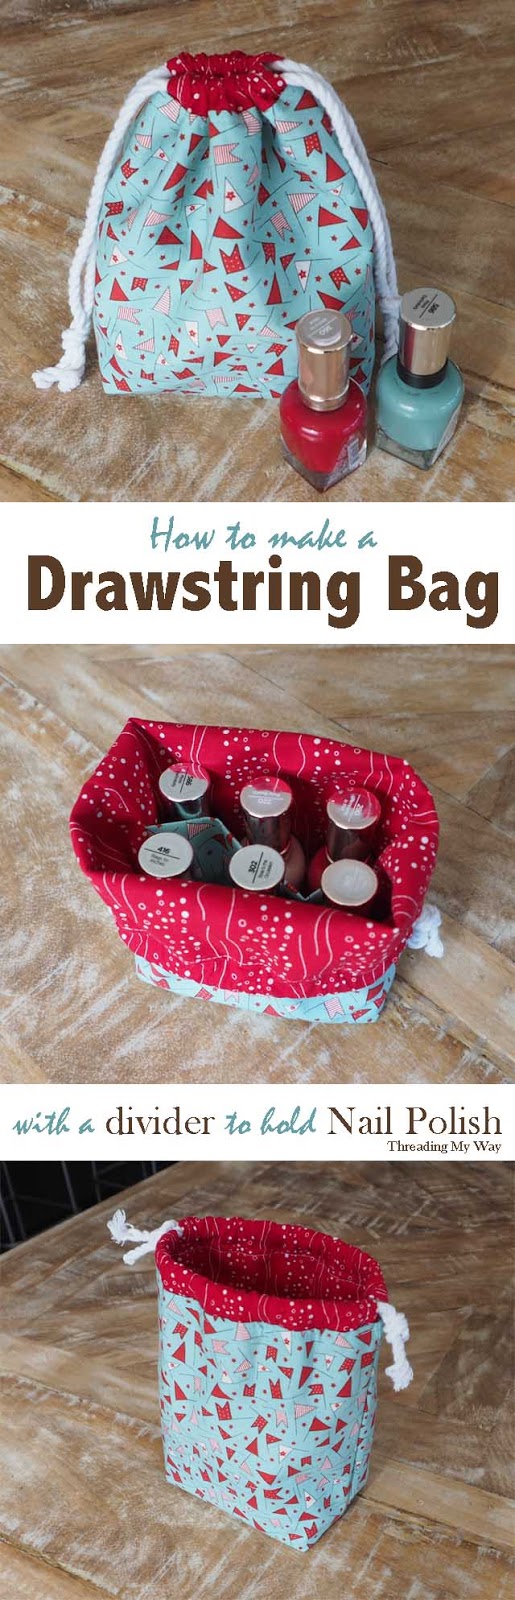 How to make a drawstring gift bag with a divider to hold nail polish. Tutorial by Threading My Way